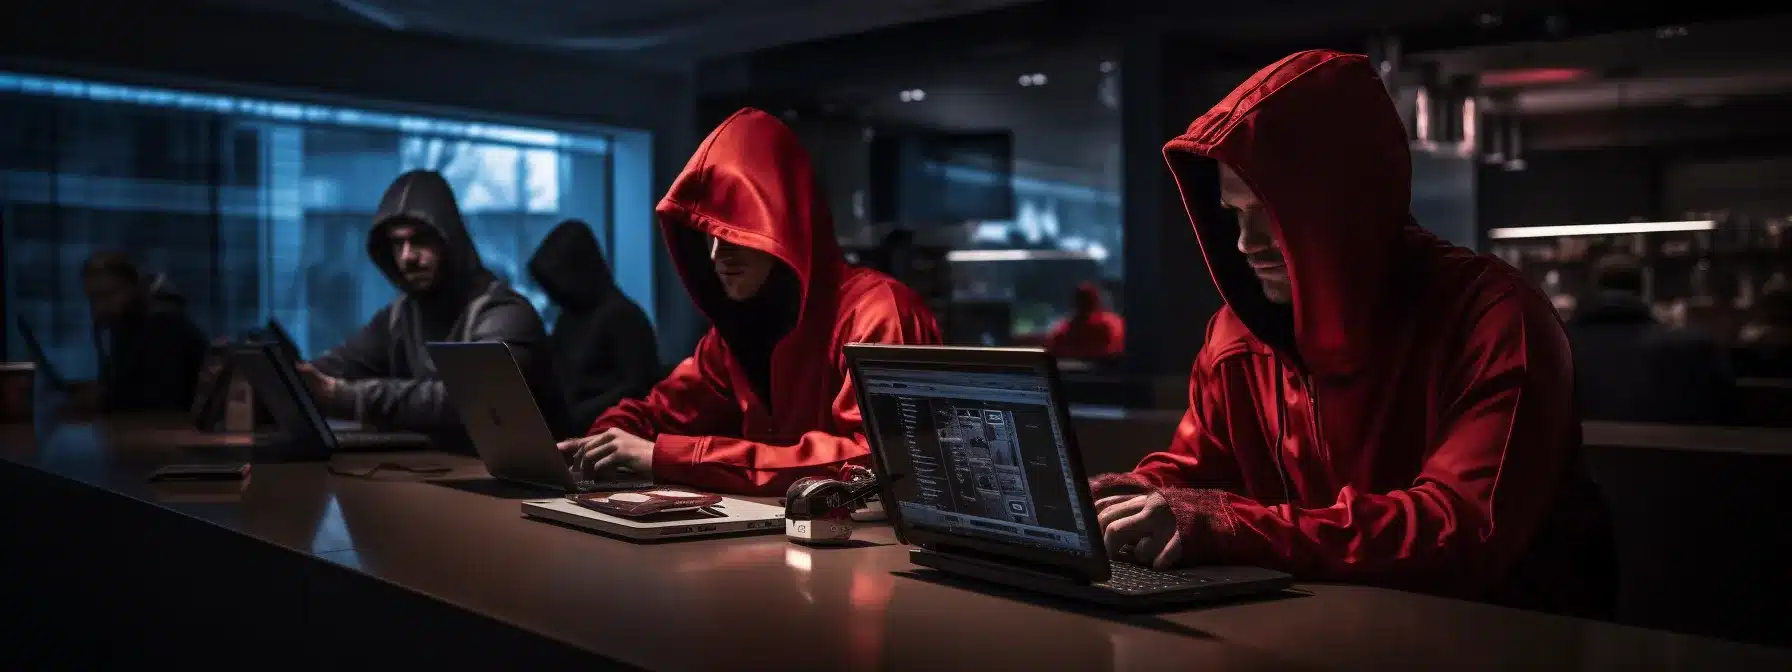 Shadowy Cybercriminals Lurking In A Dimly Lit Retail Bank, Eyeing Precious Customer Data As Brand Reputation, Customer Loyalty, And Trust Crumble Under Their Relentless Cyber Onslaught.